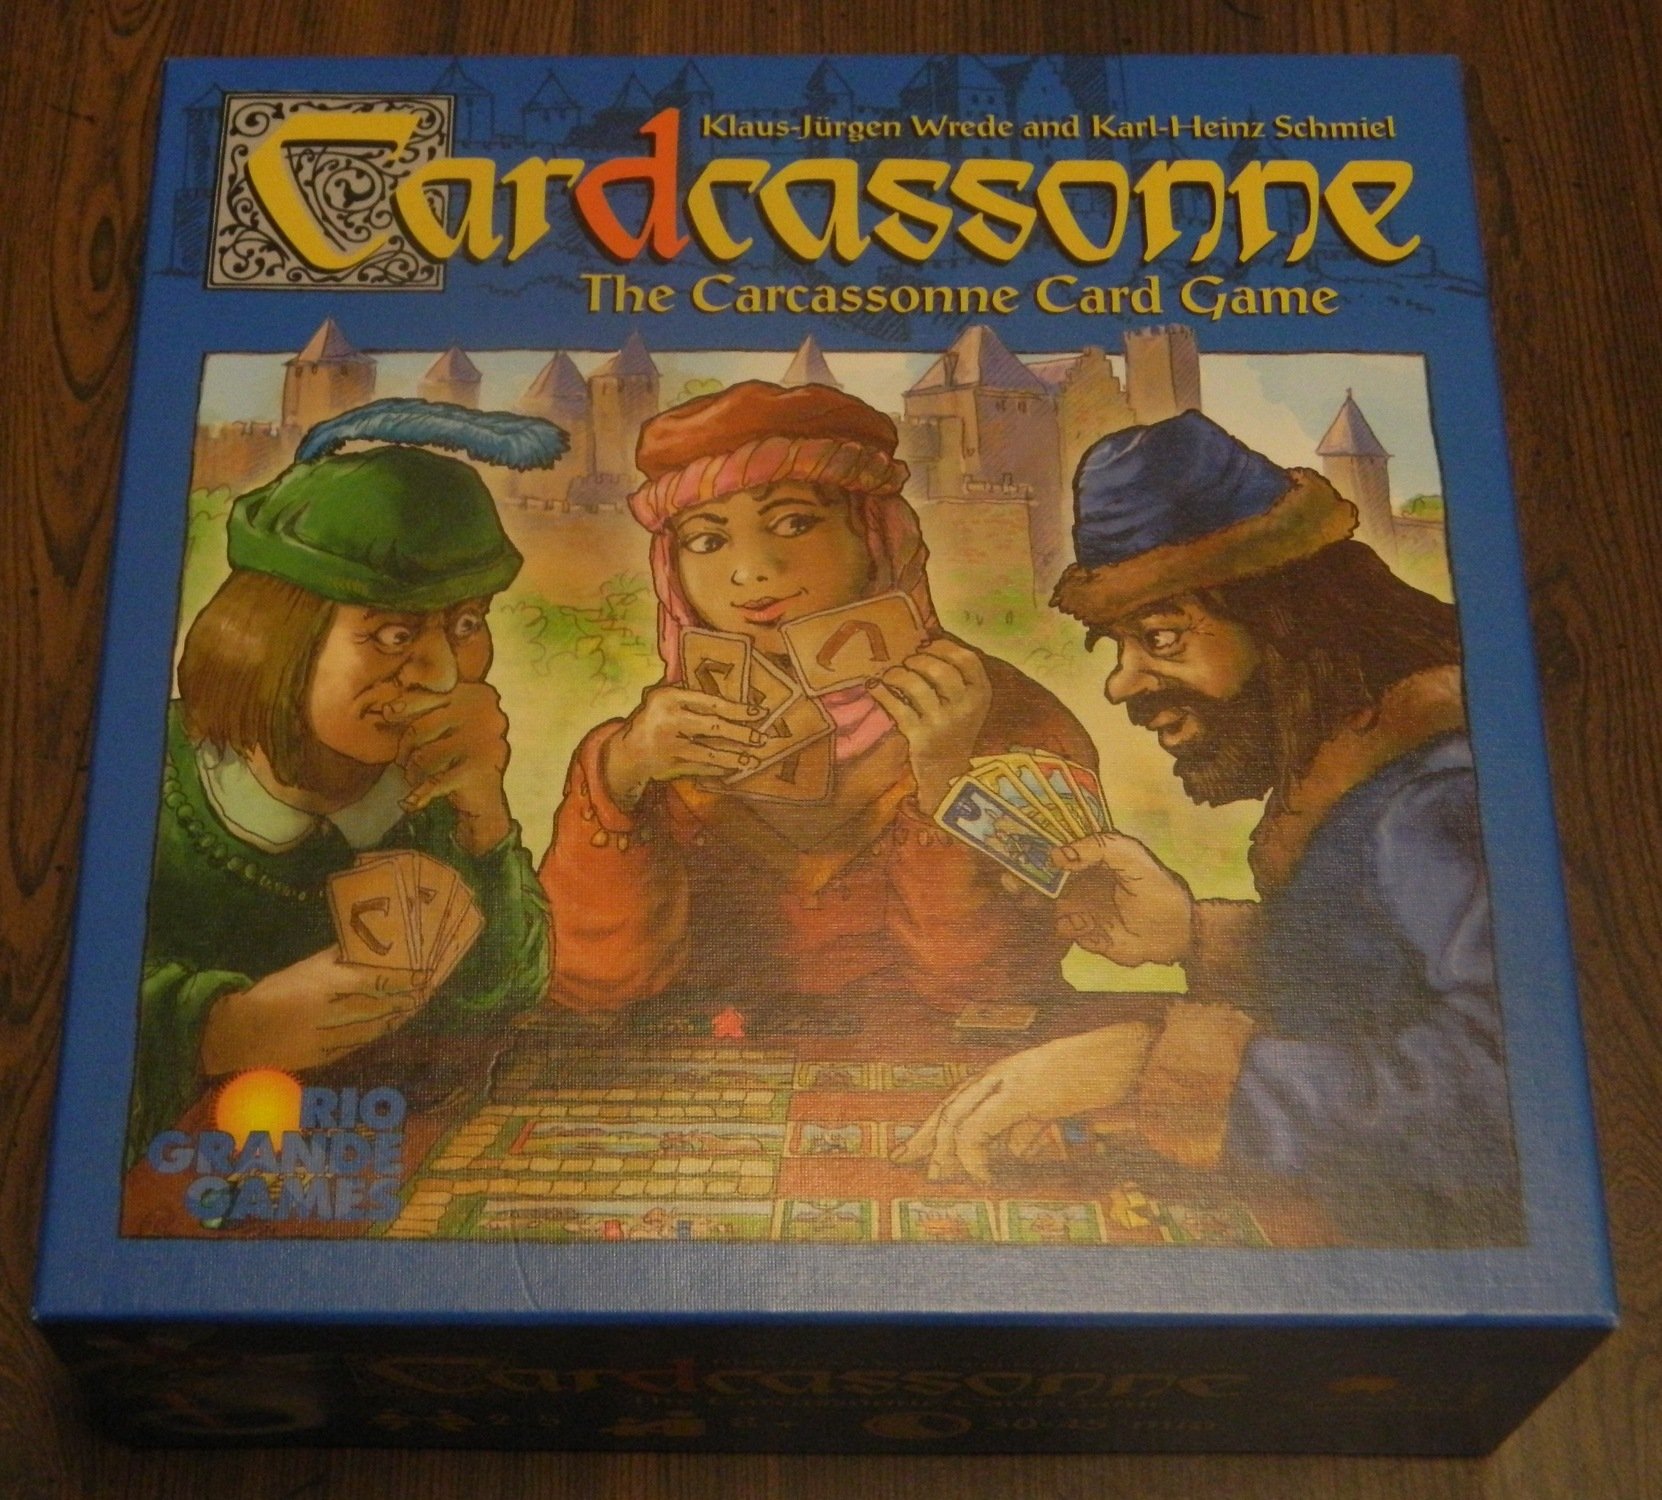 Thrift Store Finds - Cardcassonne